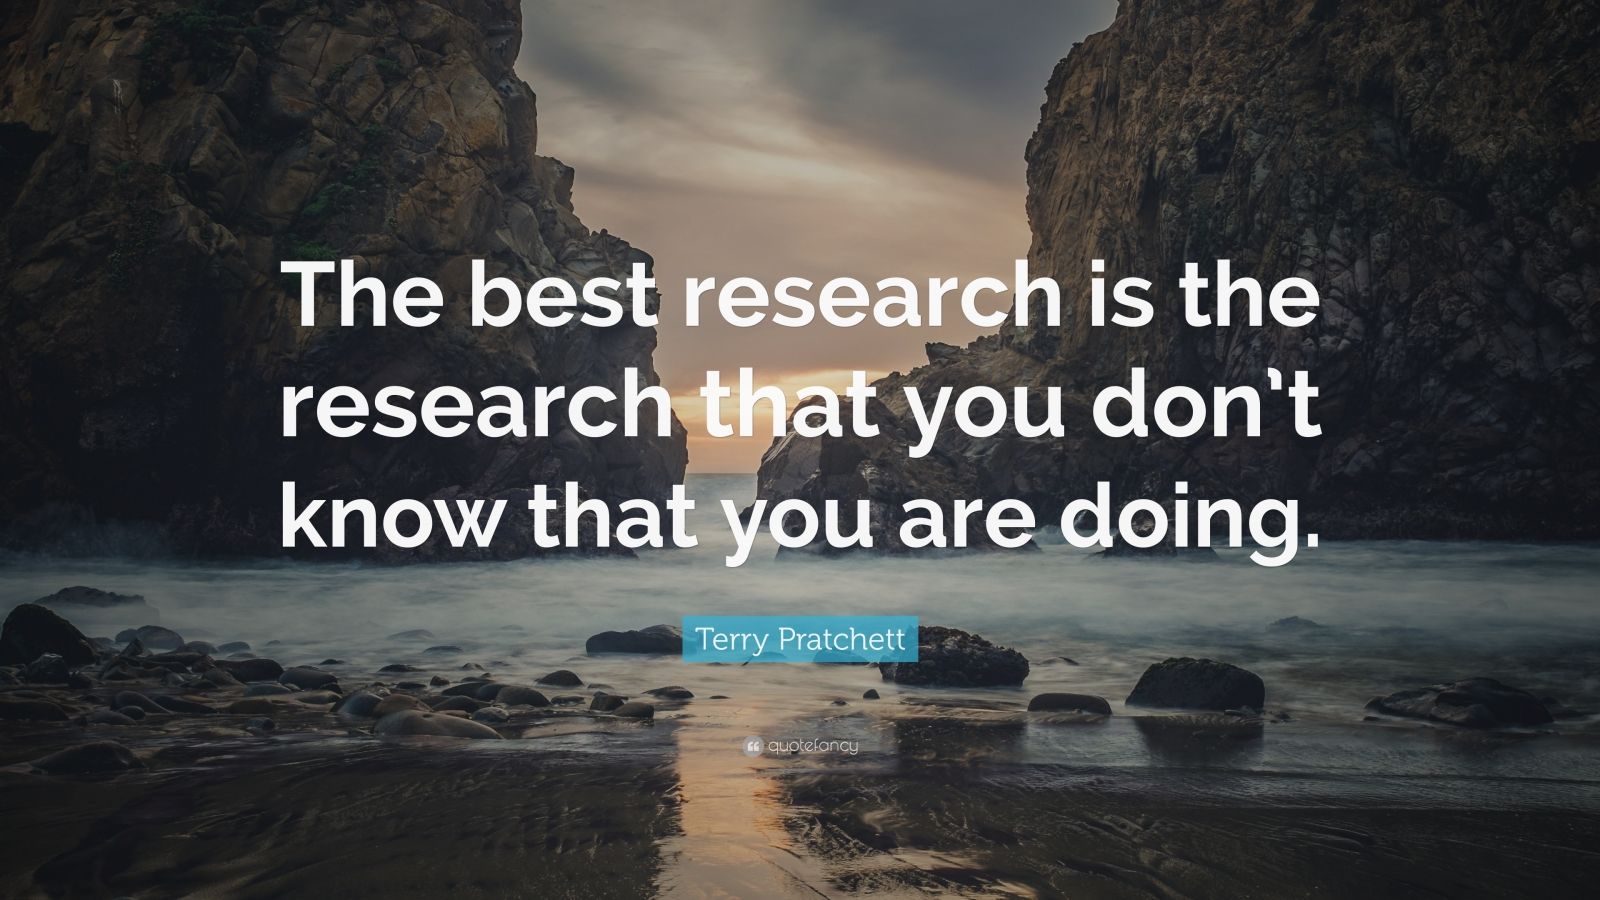 quotes on research work